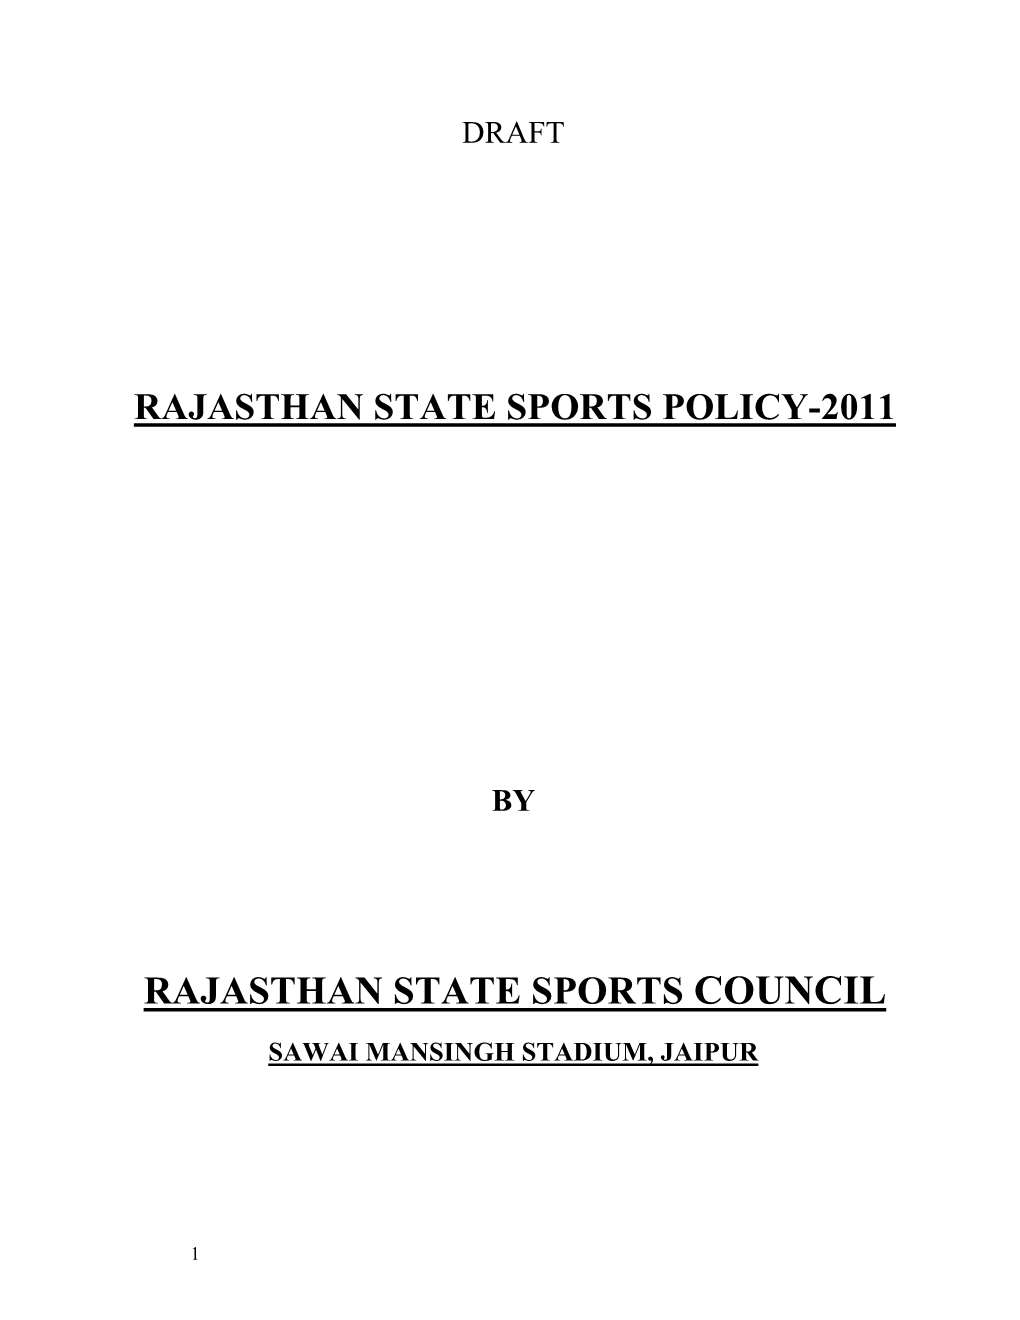 Rajasthan State Sports Council